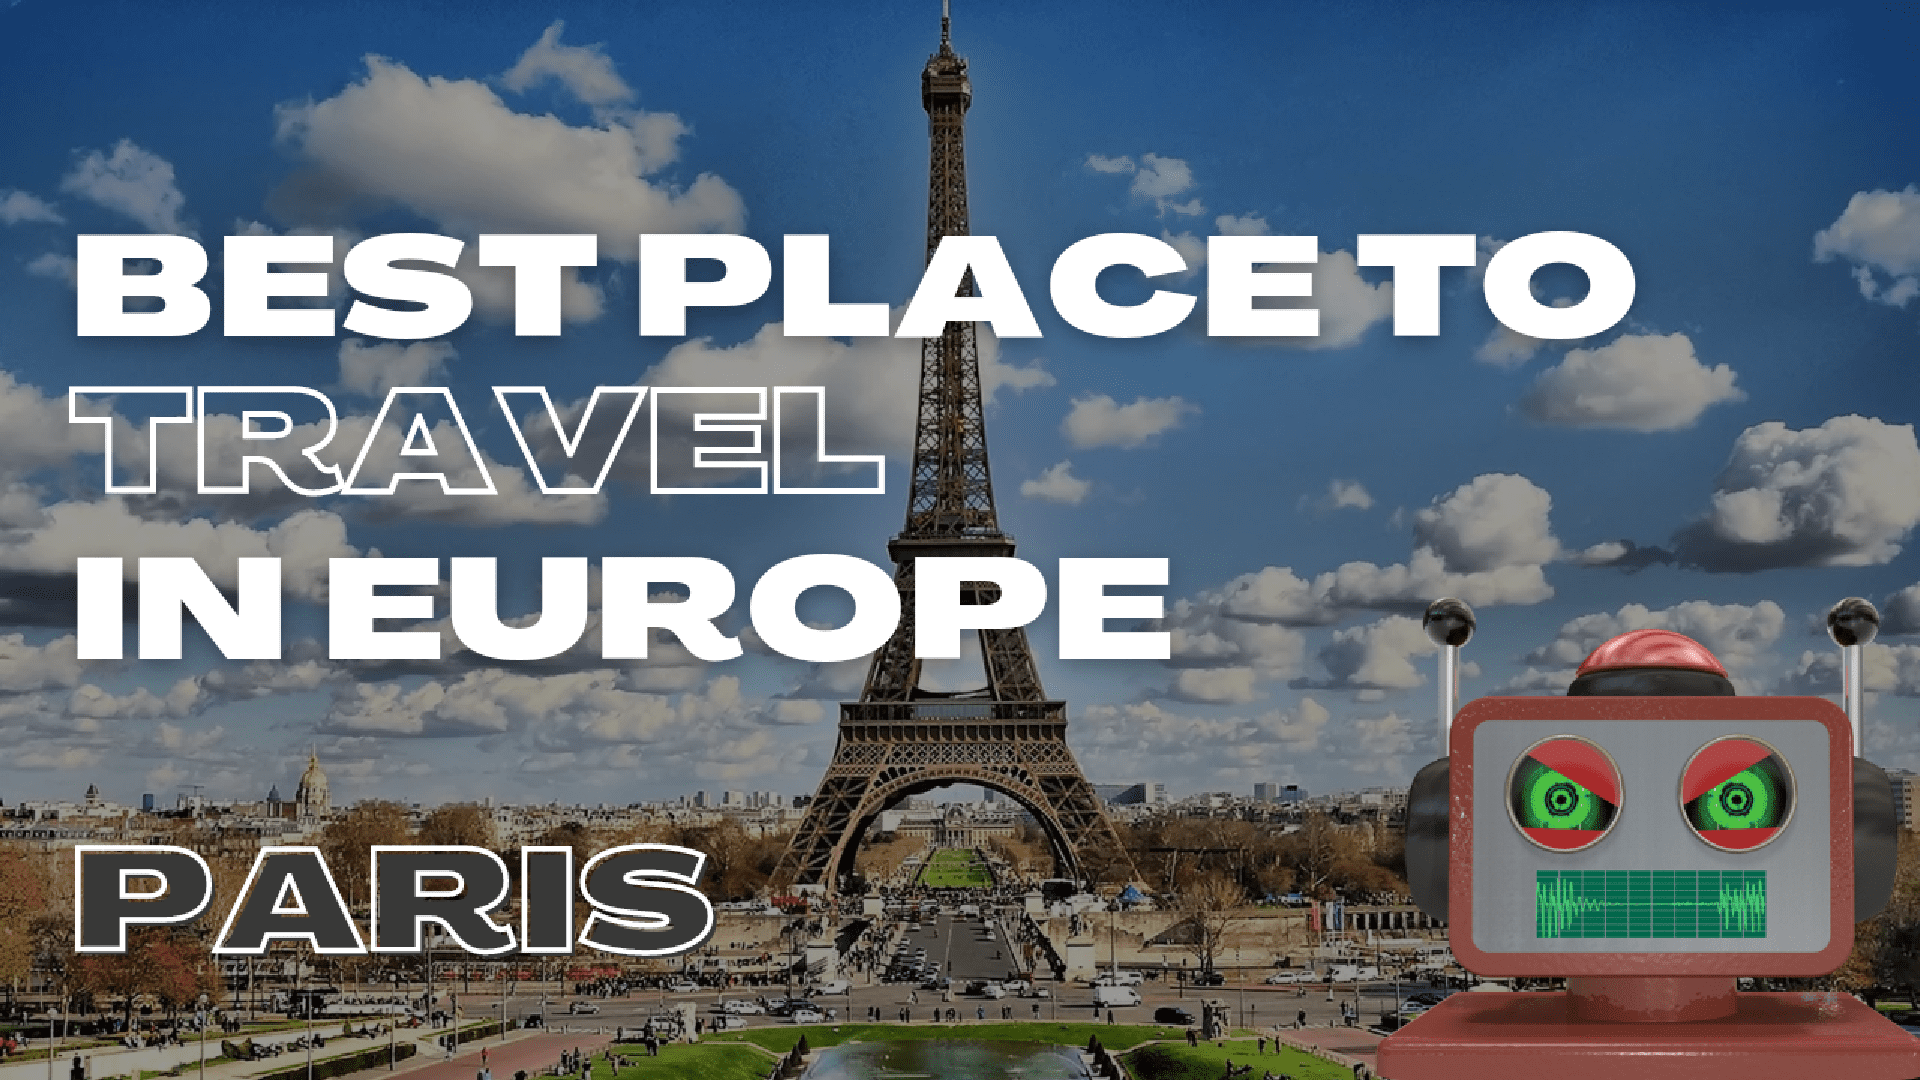 BEST PLACE TO TRAVEL IN EUROPE (Paris)